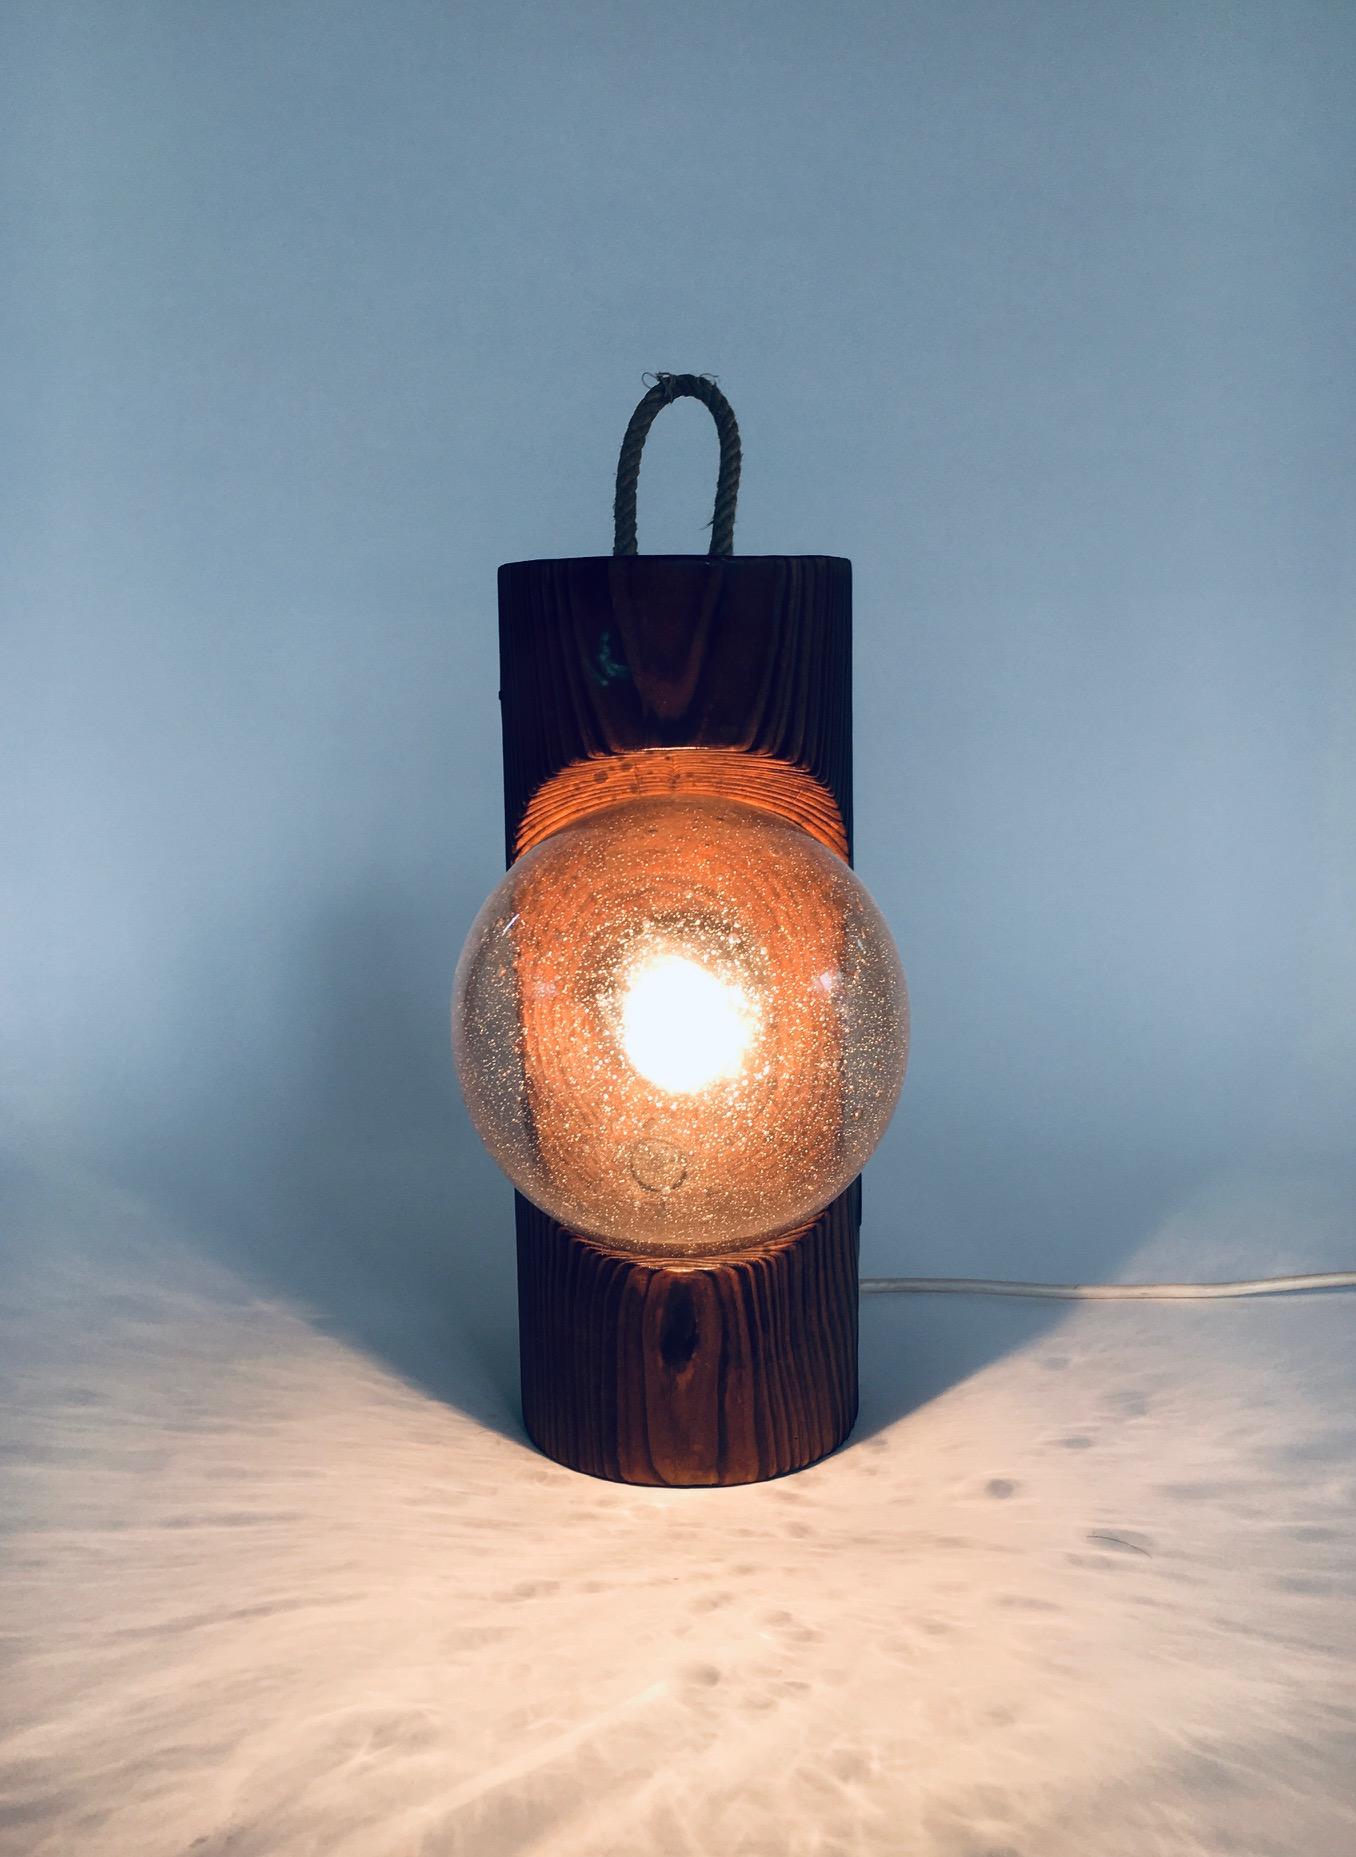 Mid-20th Century Brutalist Design Wood Table or Wall Lamp by Temde Leuchten, Switzerland 1960's For Sale